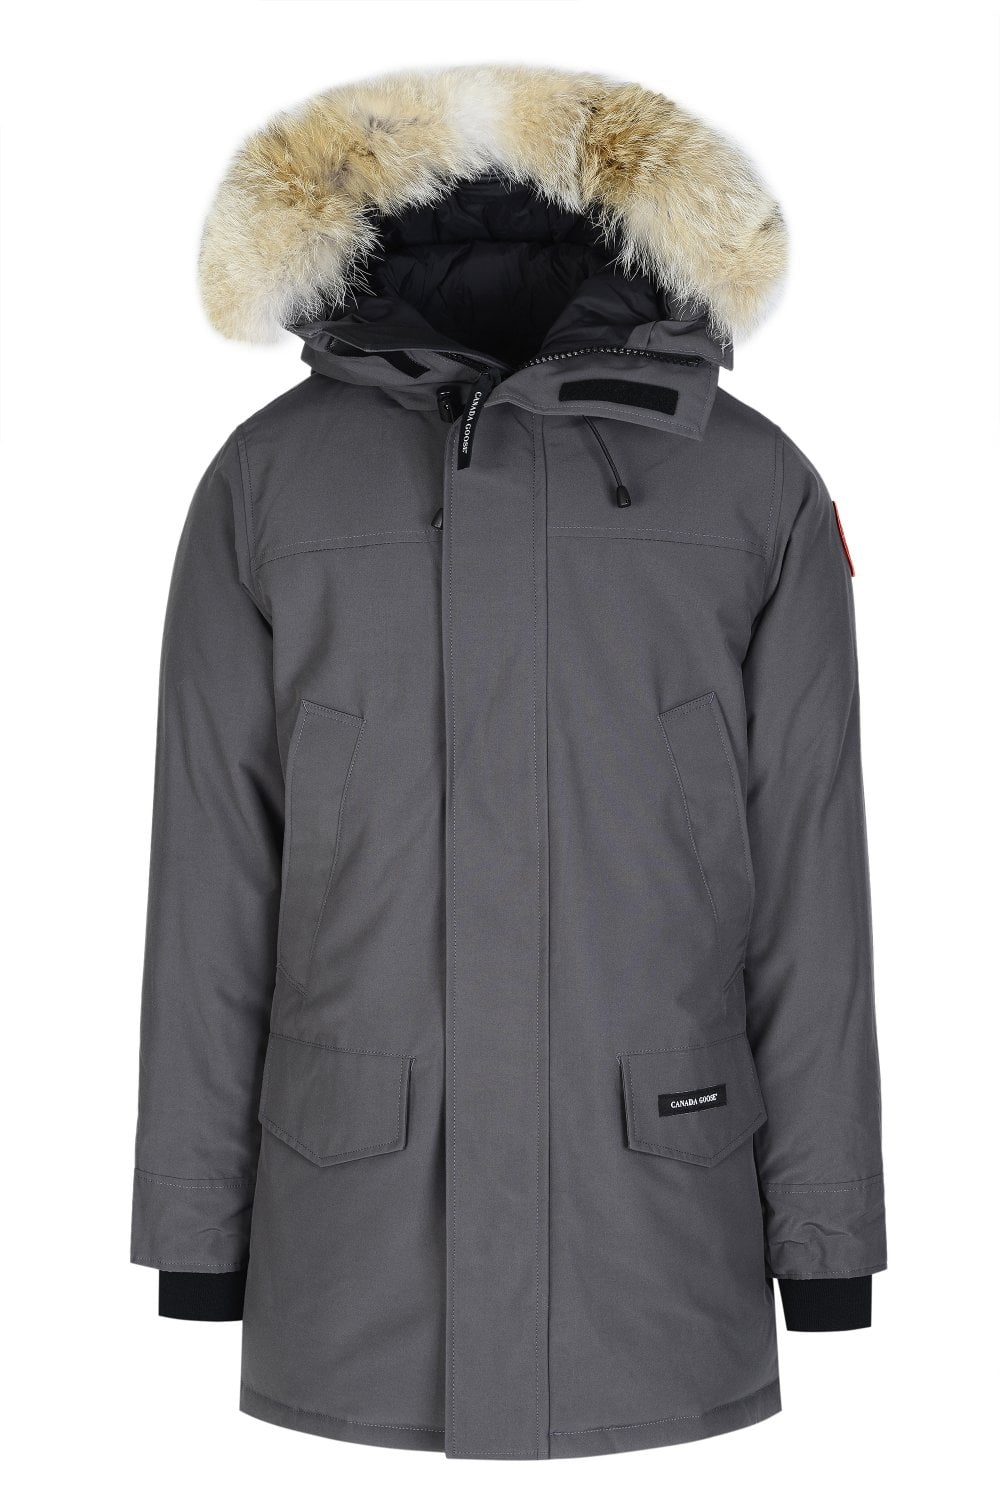 Canada Goose Fusion Fit Langford Parka in Graphite